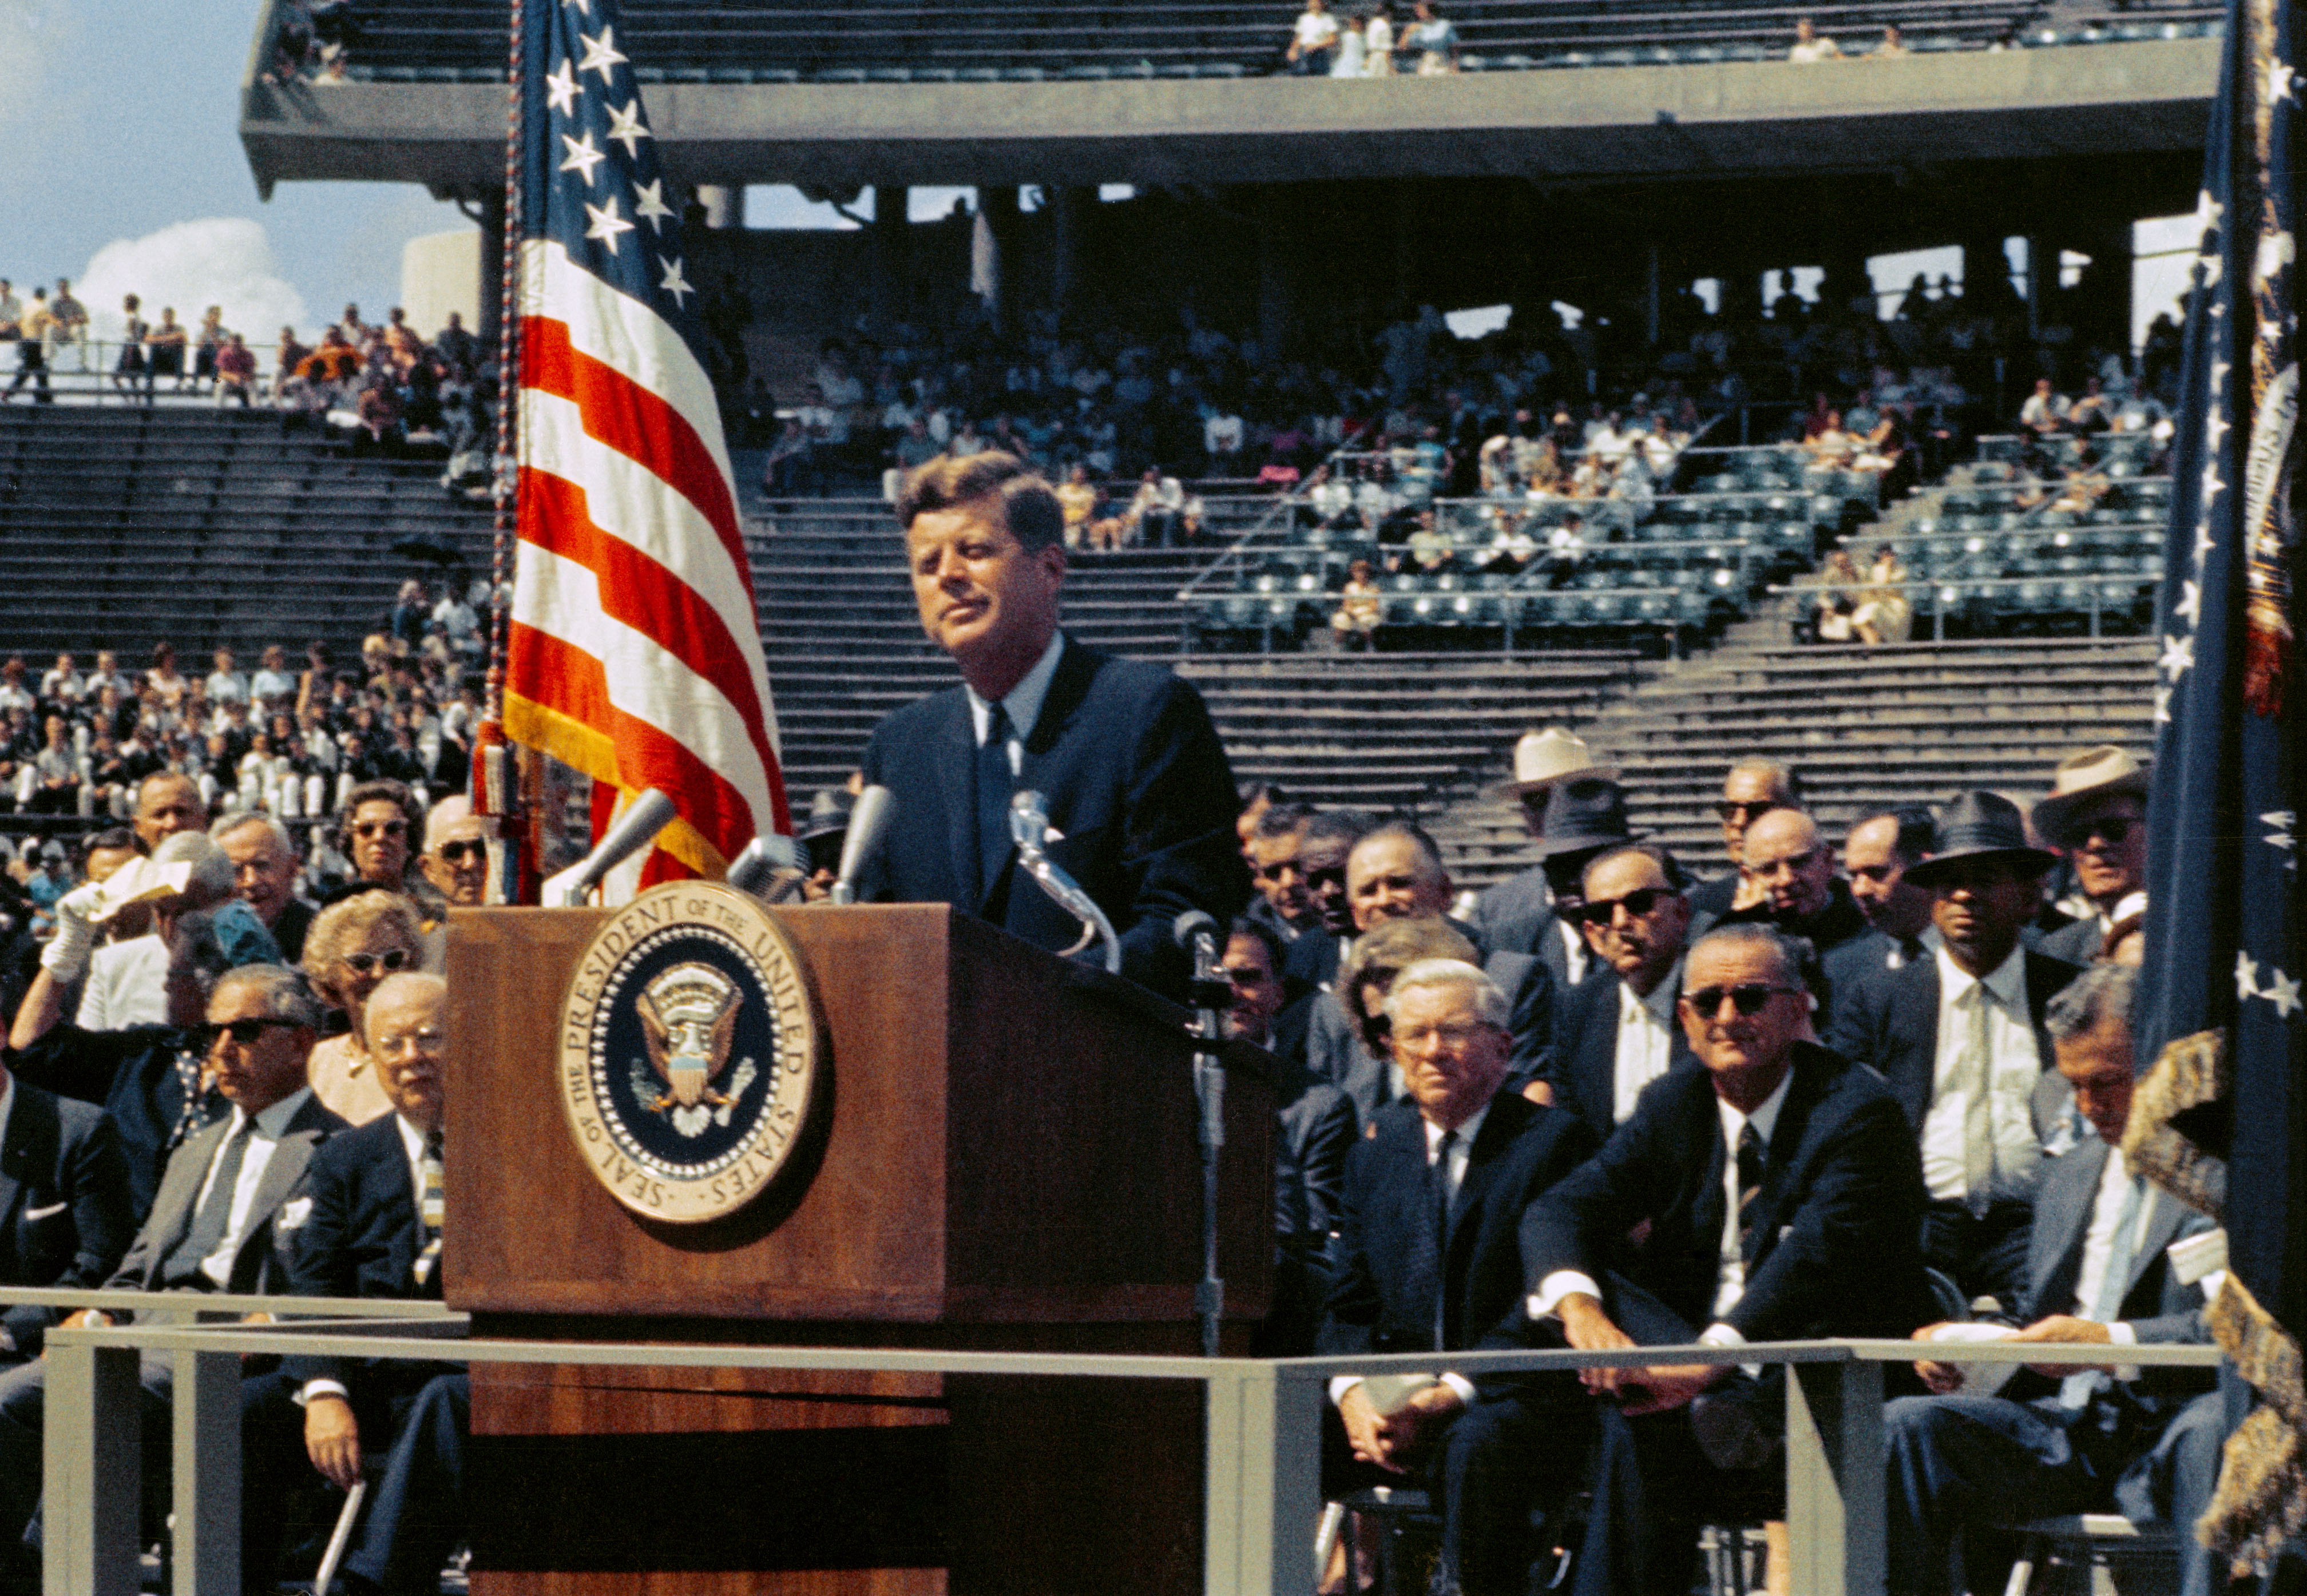 President Kennedy reaffirms the goal during his address at Rice University in Houston in September 1962